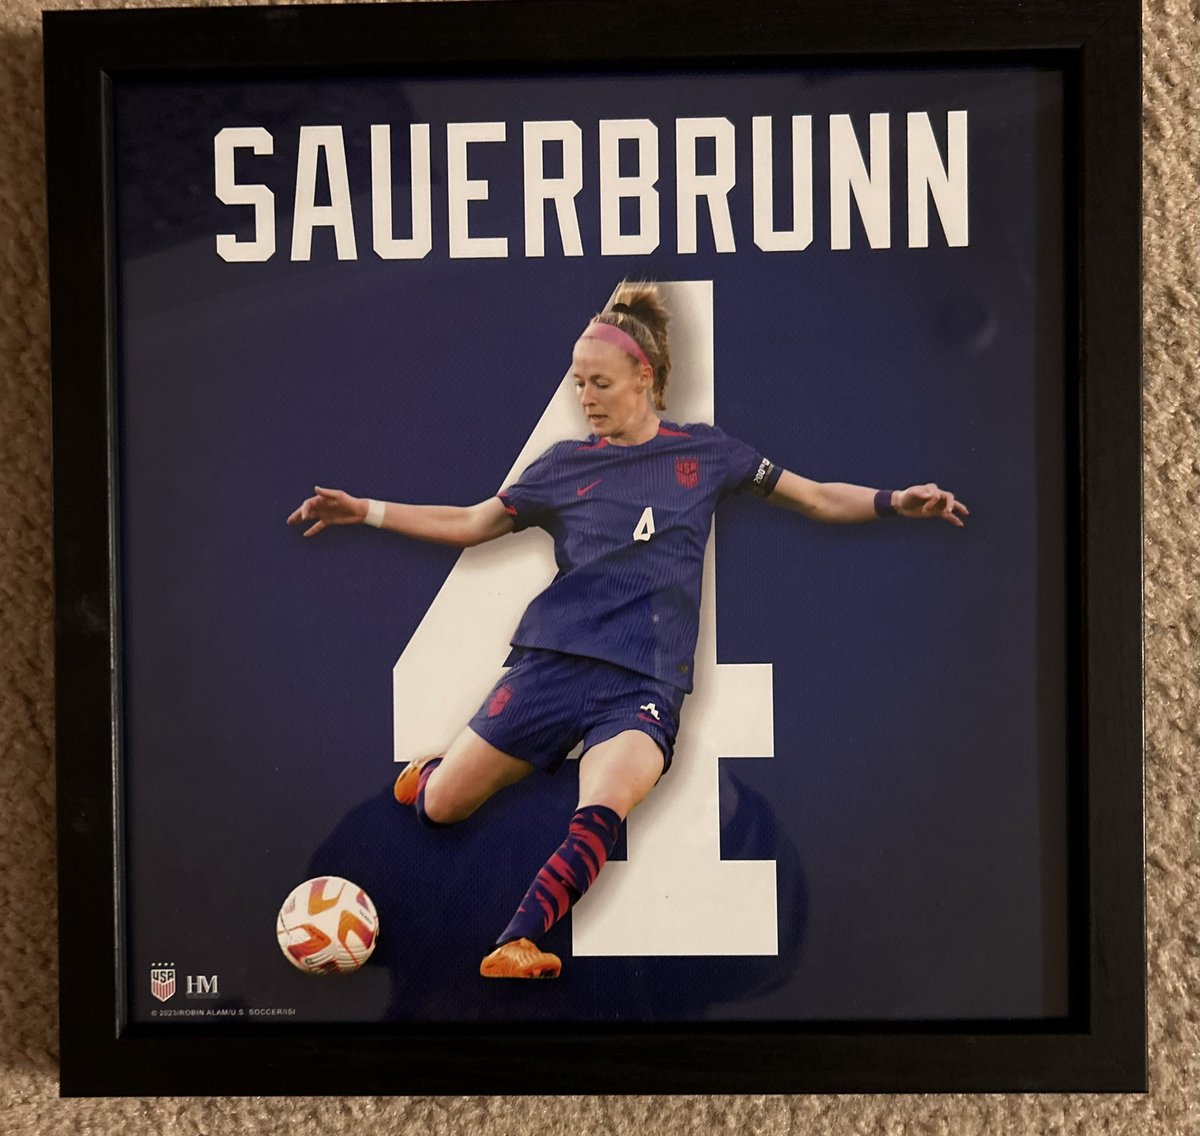 One of my birthday gifts 🥰🫶🏻 People know my love of @beckysauerbrunn